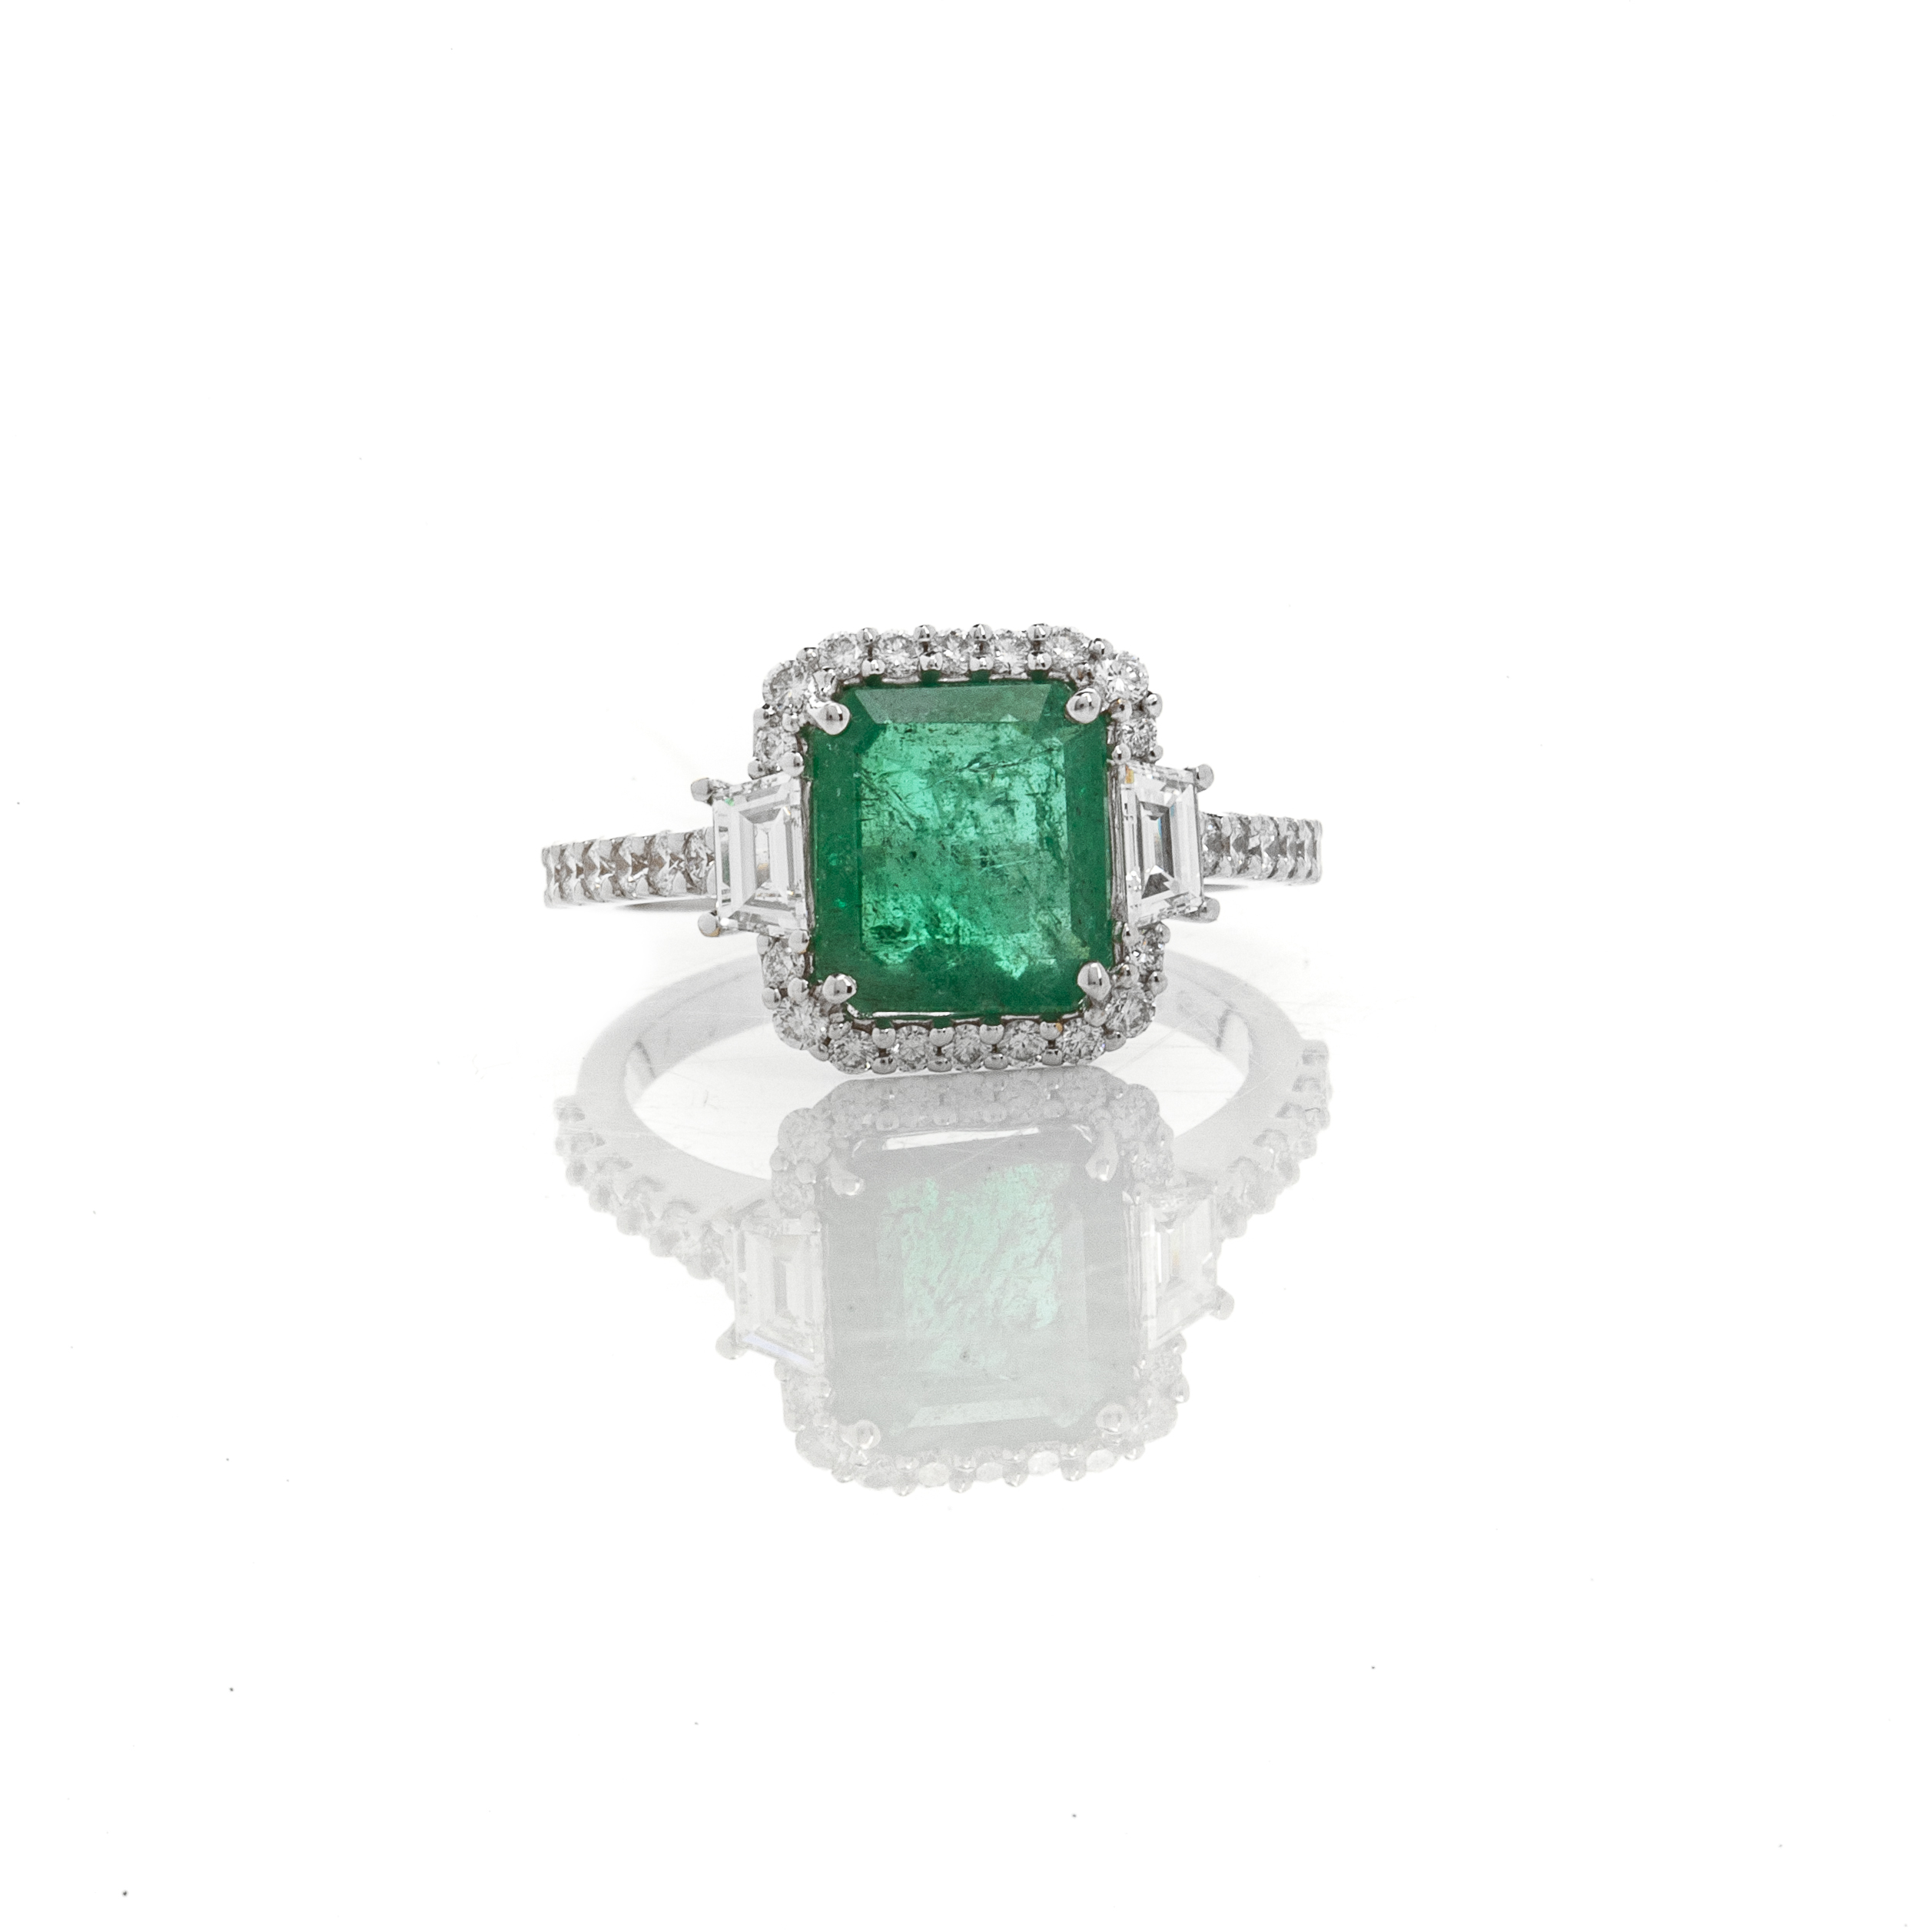 White Gold Rosette Ring with Octagonal Emerald and Diamonds (2.24ct)